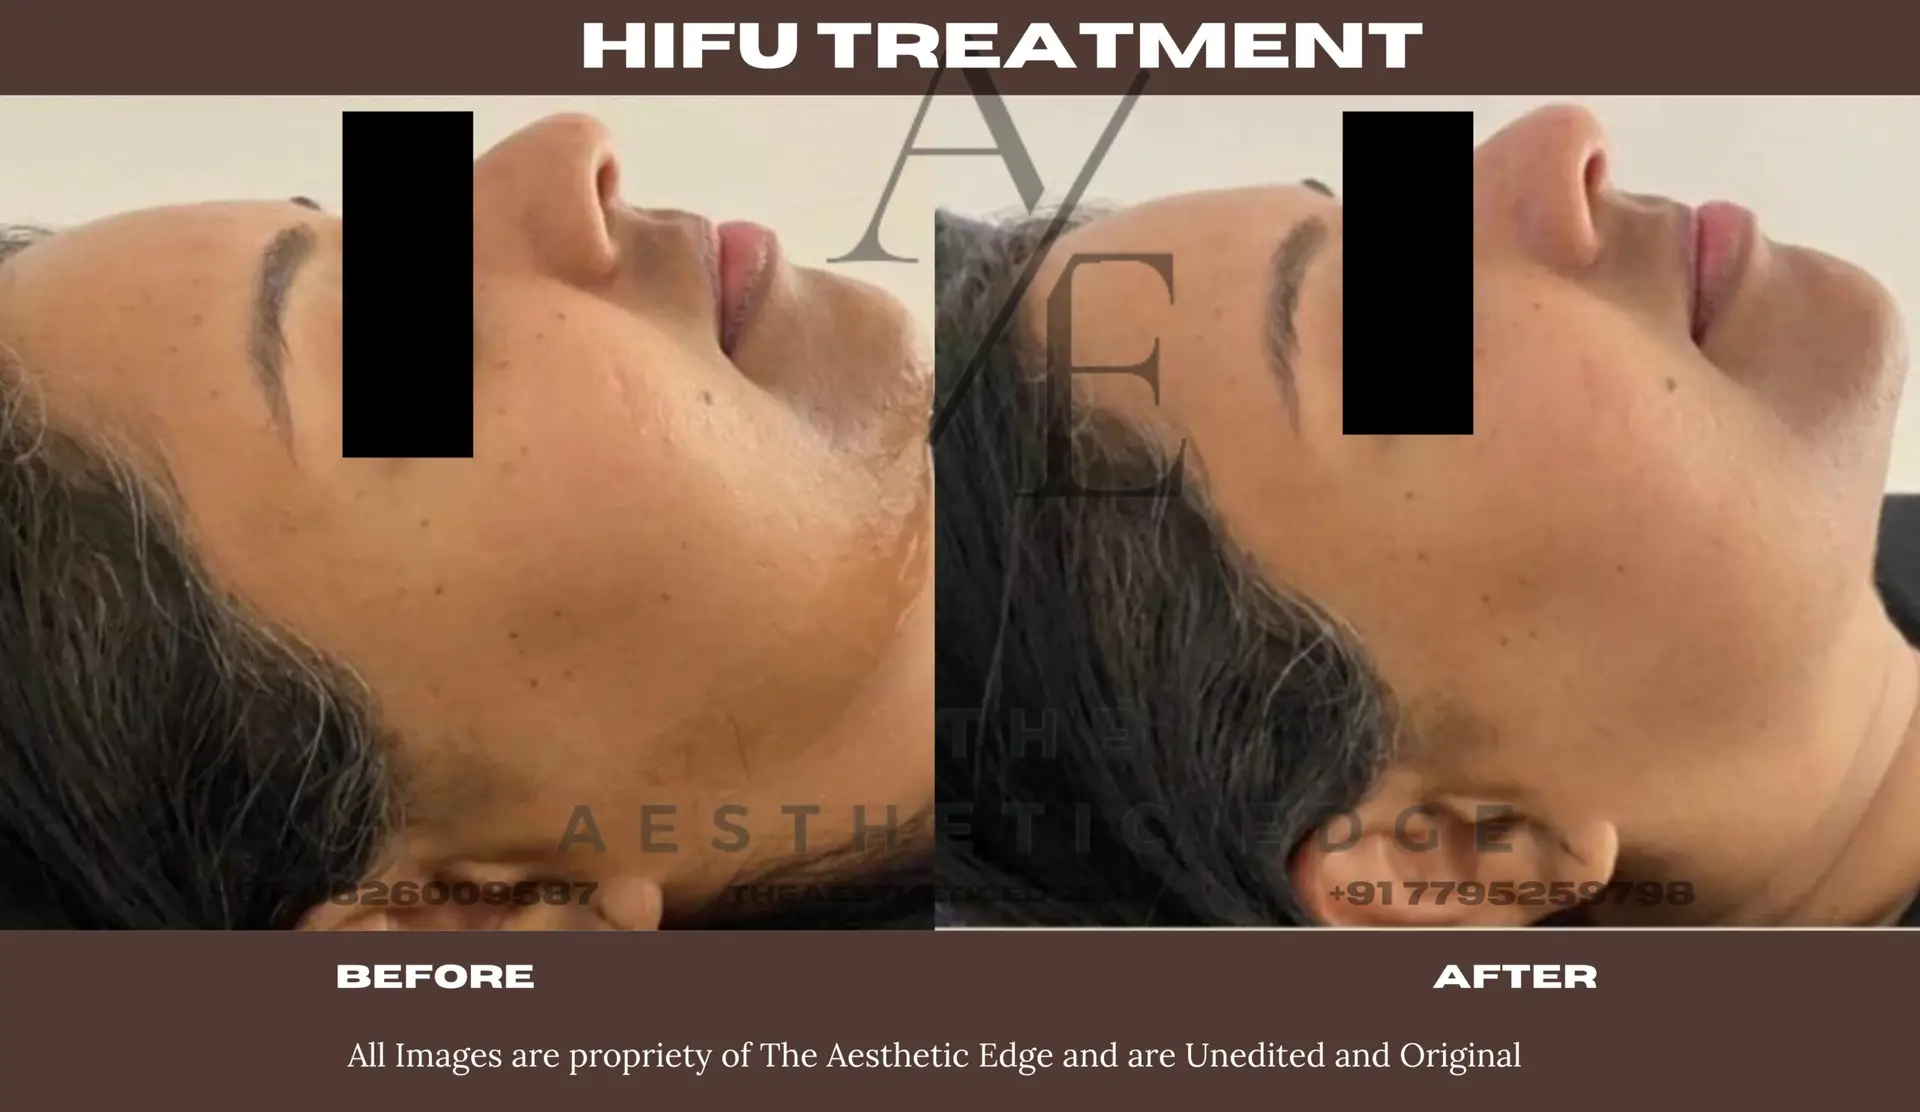 HIFU treatment before after